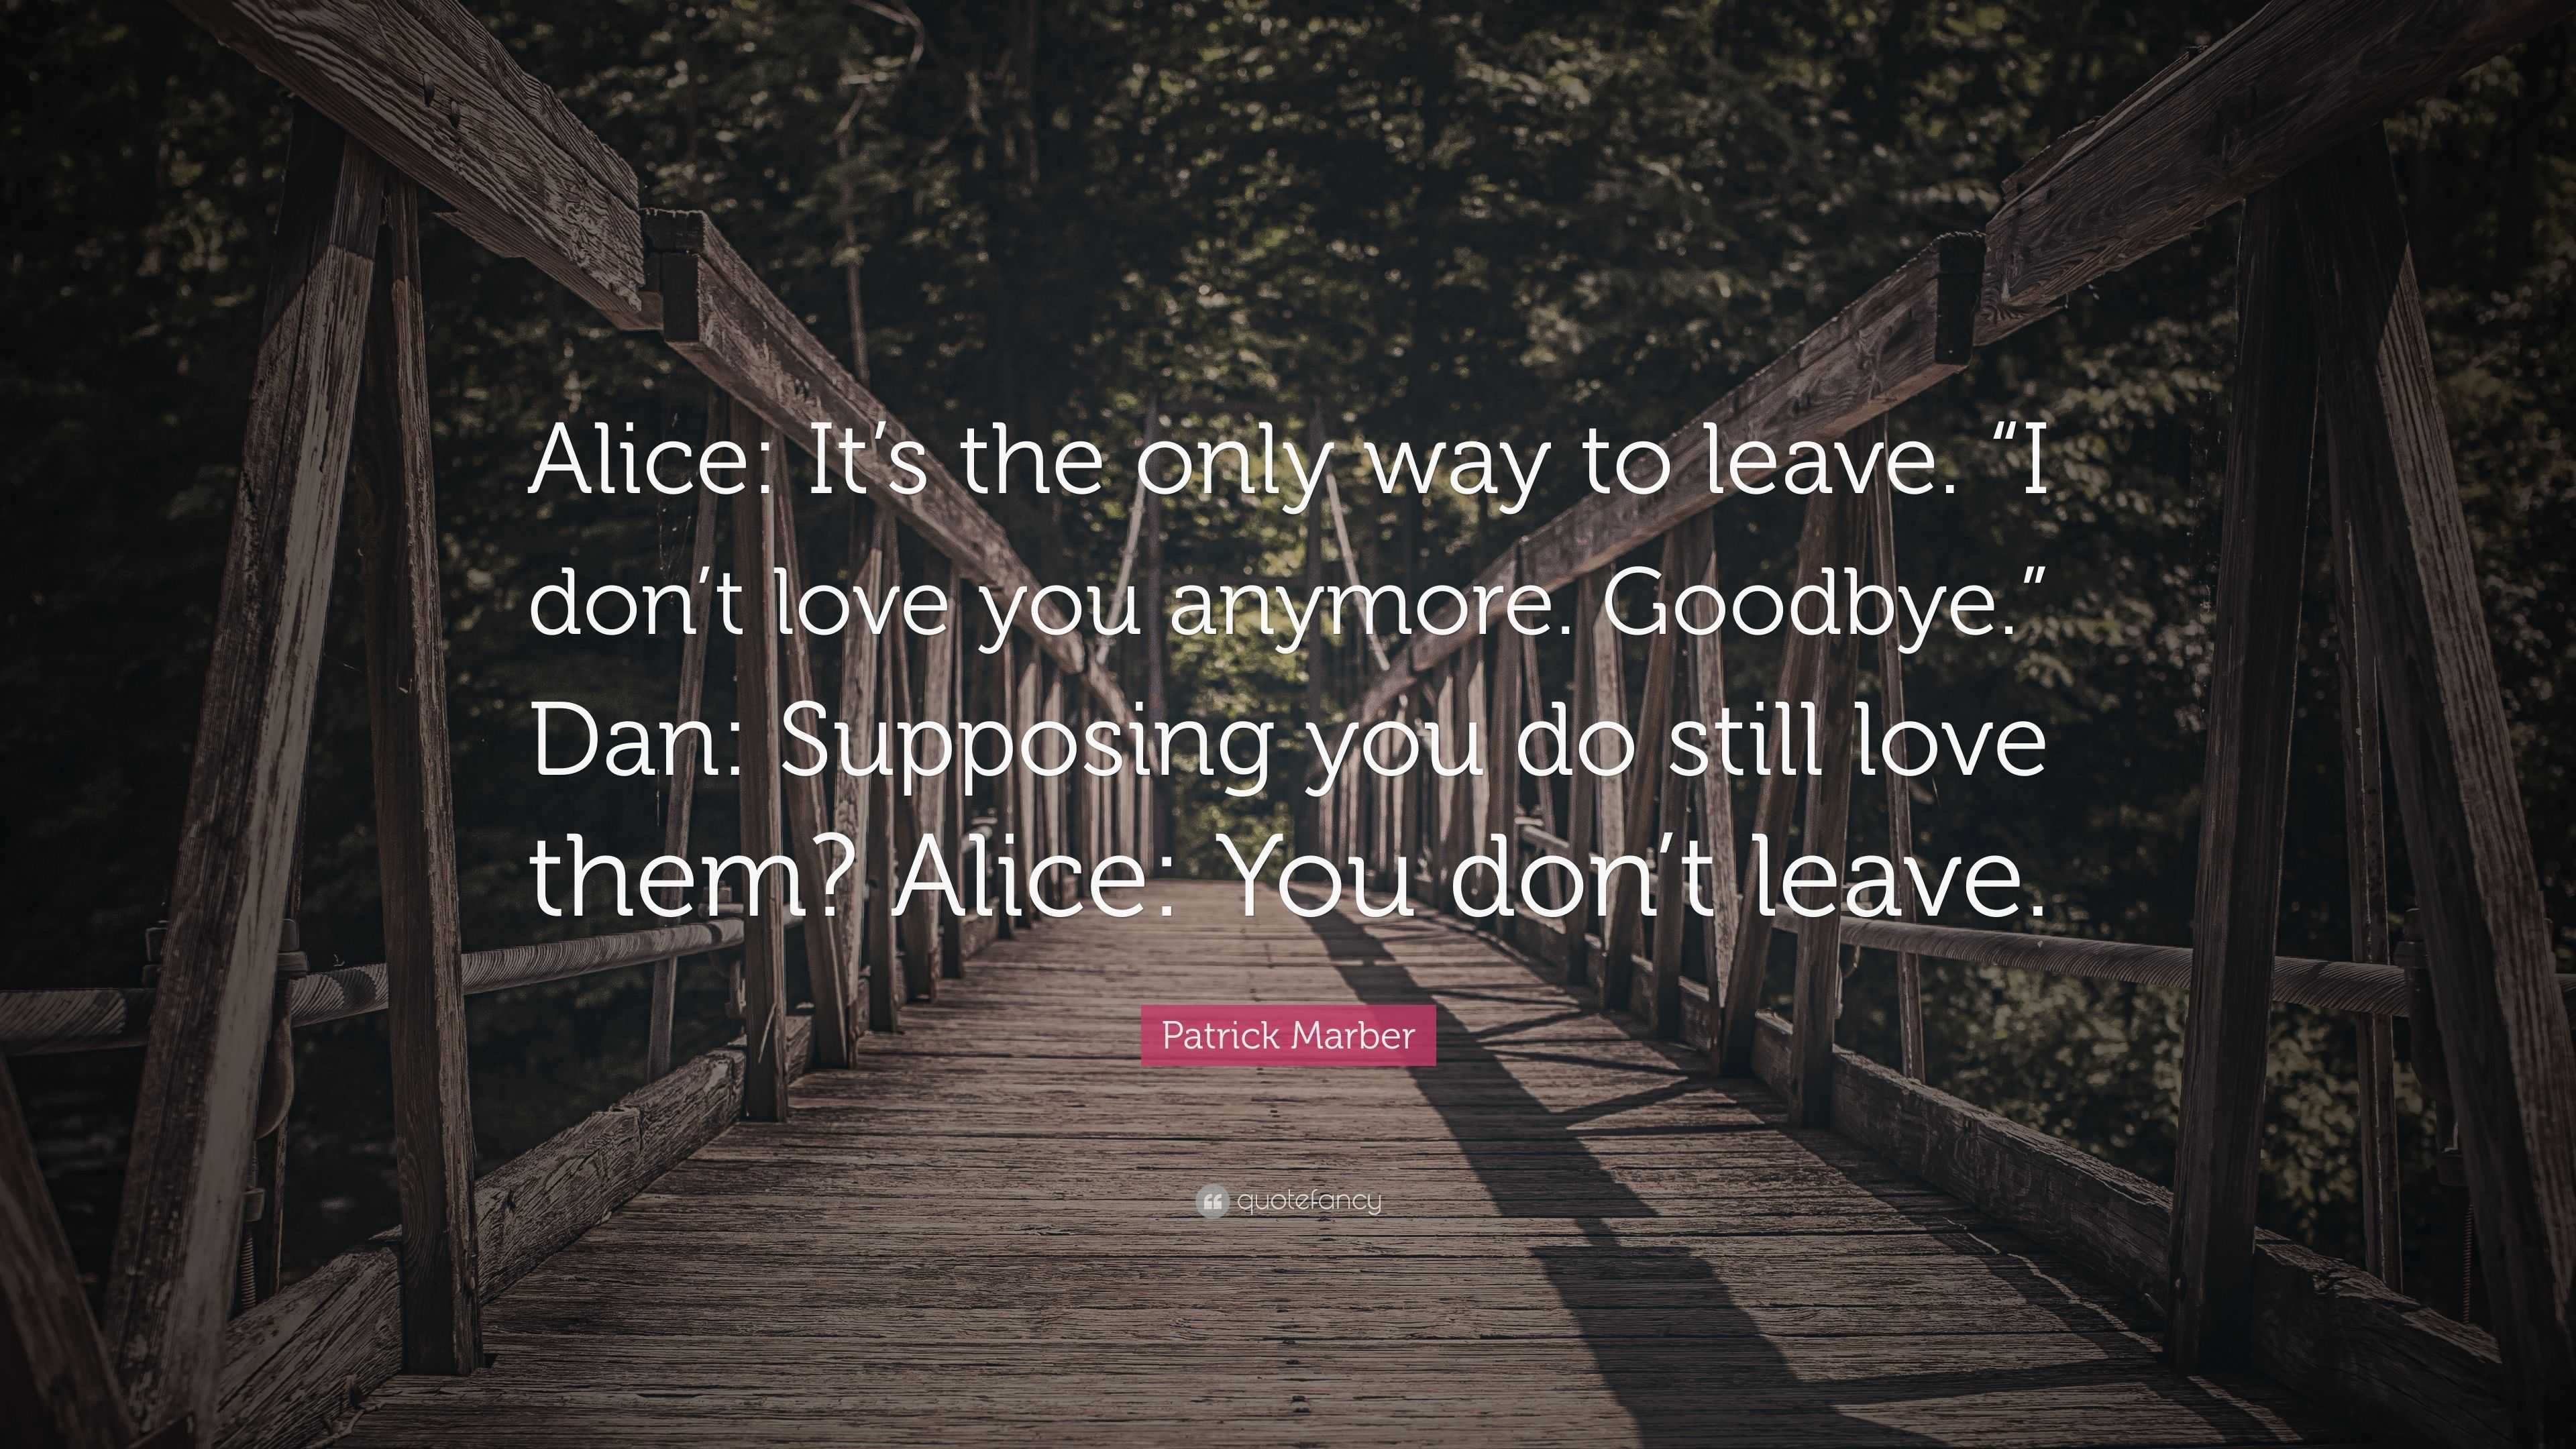 Patrick Marber Quote: “Alice: It's the only way to leave. “I don't love you  anymore. Goodbye.” Dan: Supposing you do still love them? Alice: Yo”